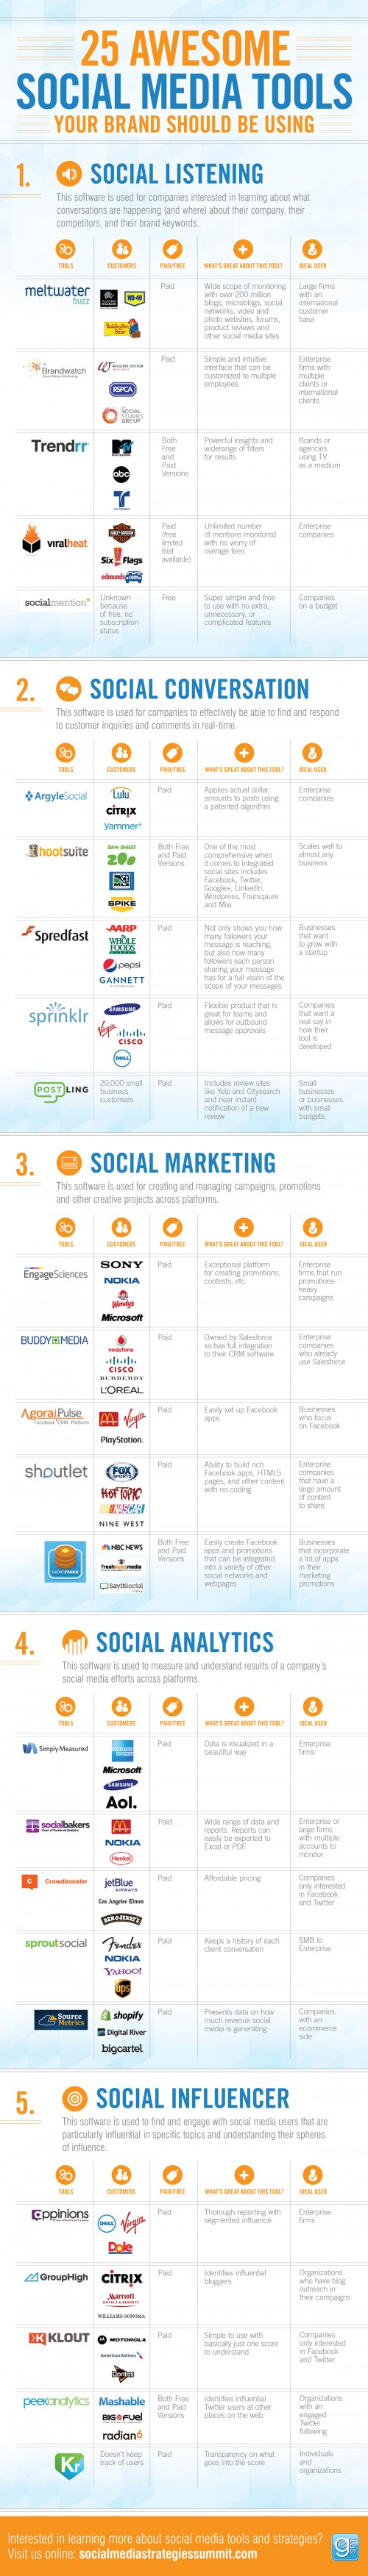 25 Awesome Social Media Tools Your Brand Should Be Using INFOGRAPHIC